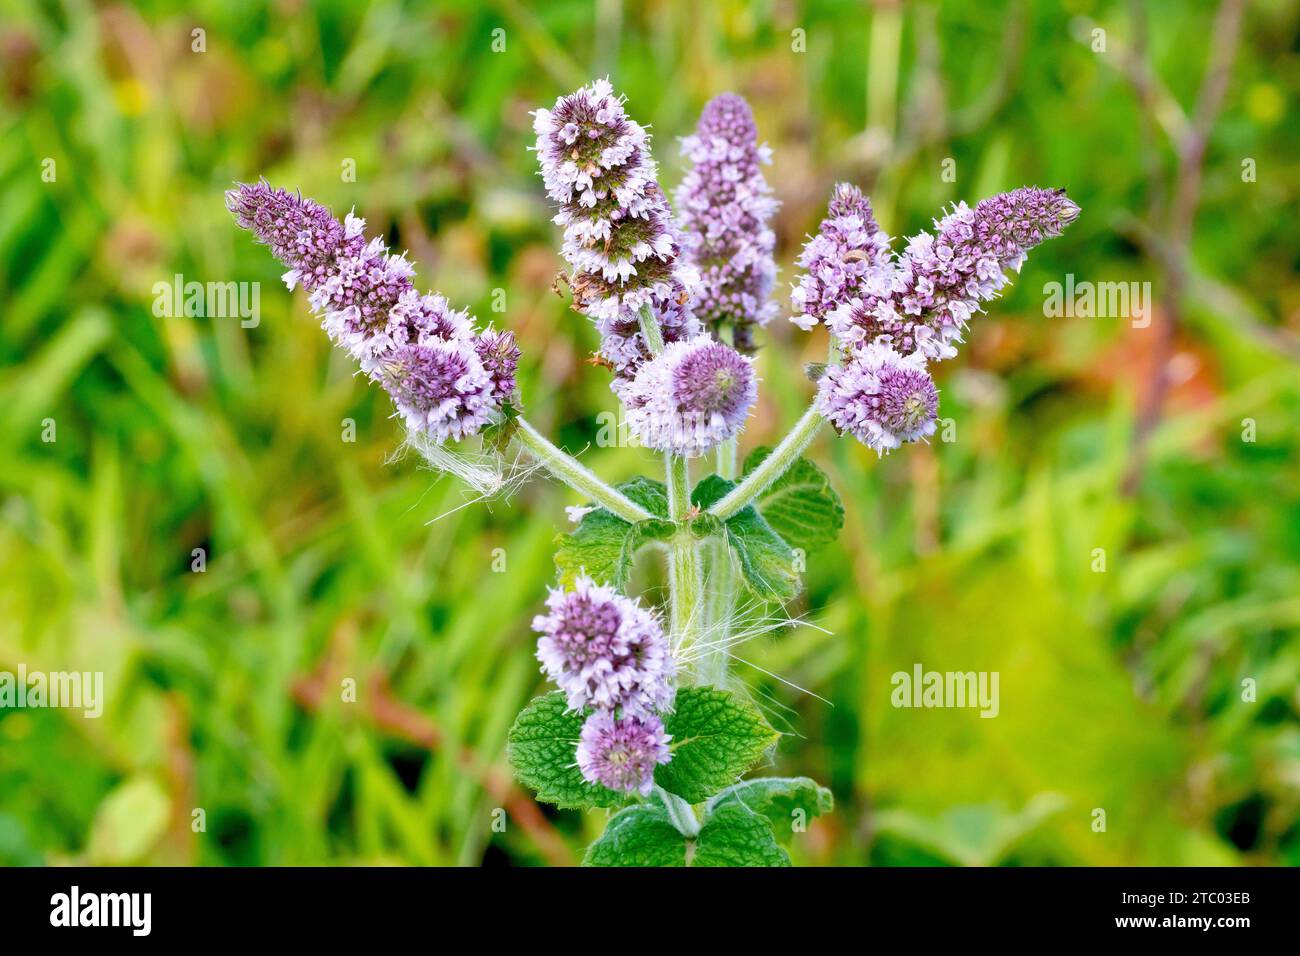 Mint, possibly Spearmint (mentha spicata), possibly Apple-scented Mint (mentha rotundifolia), close up showing spikes of the plant's pink flowers. Stock Photo